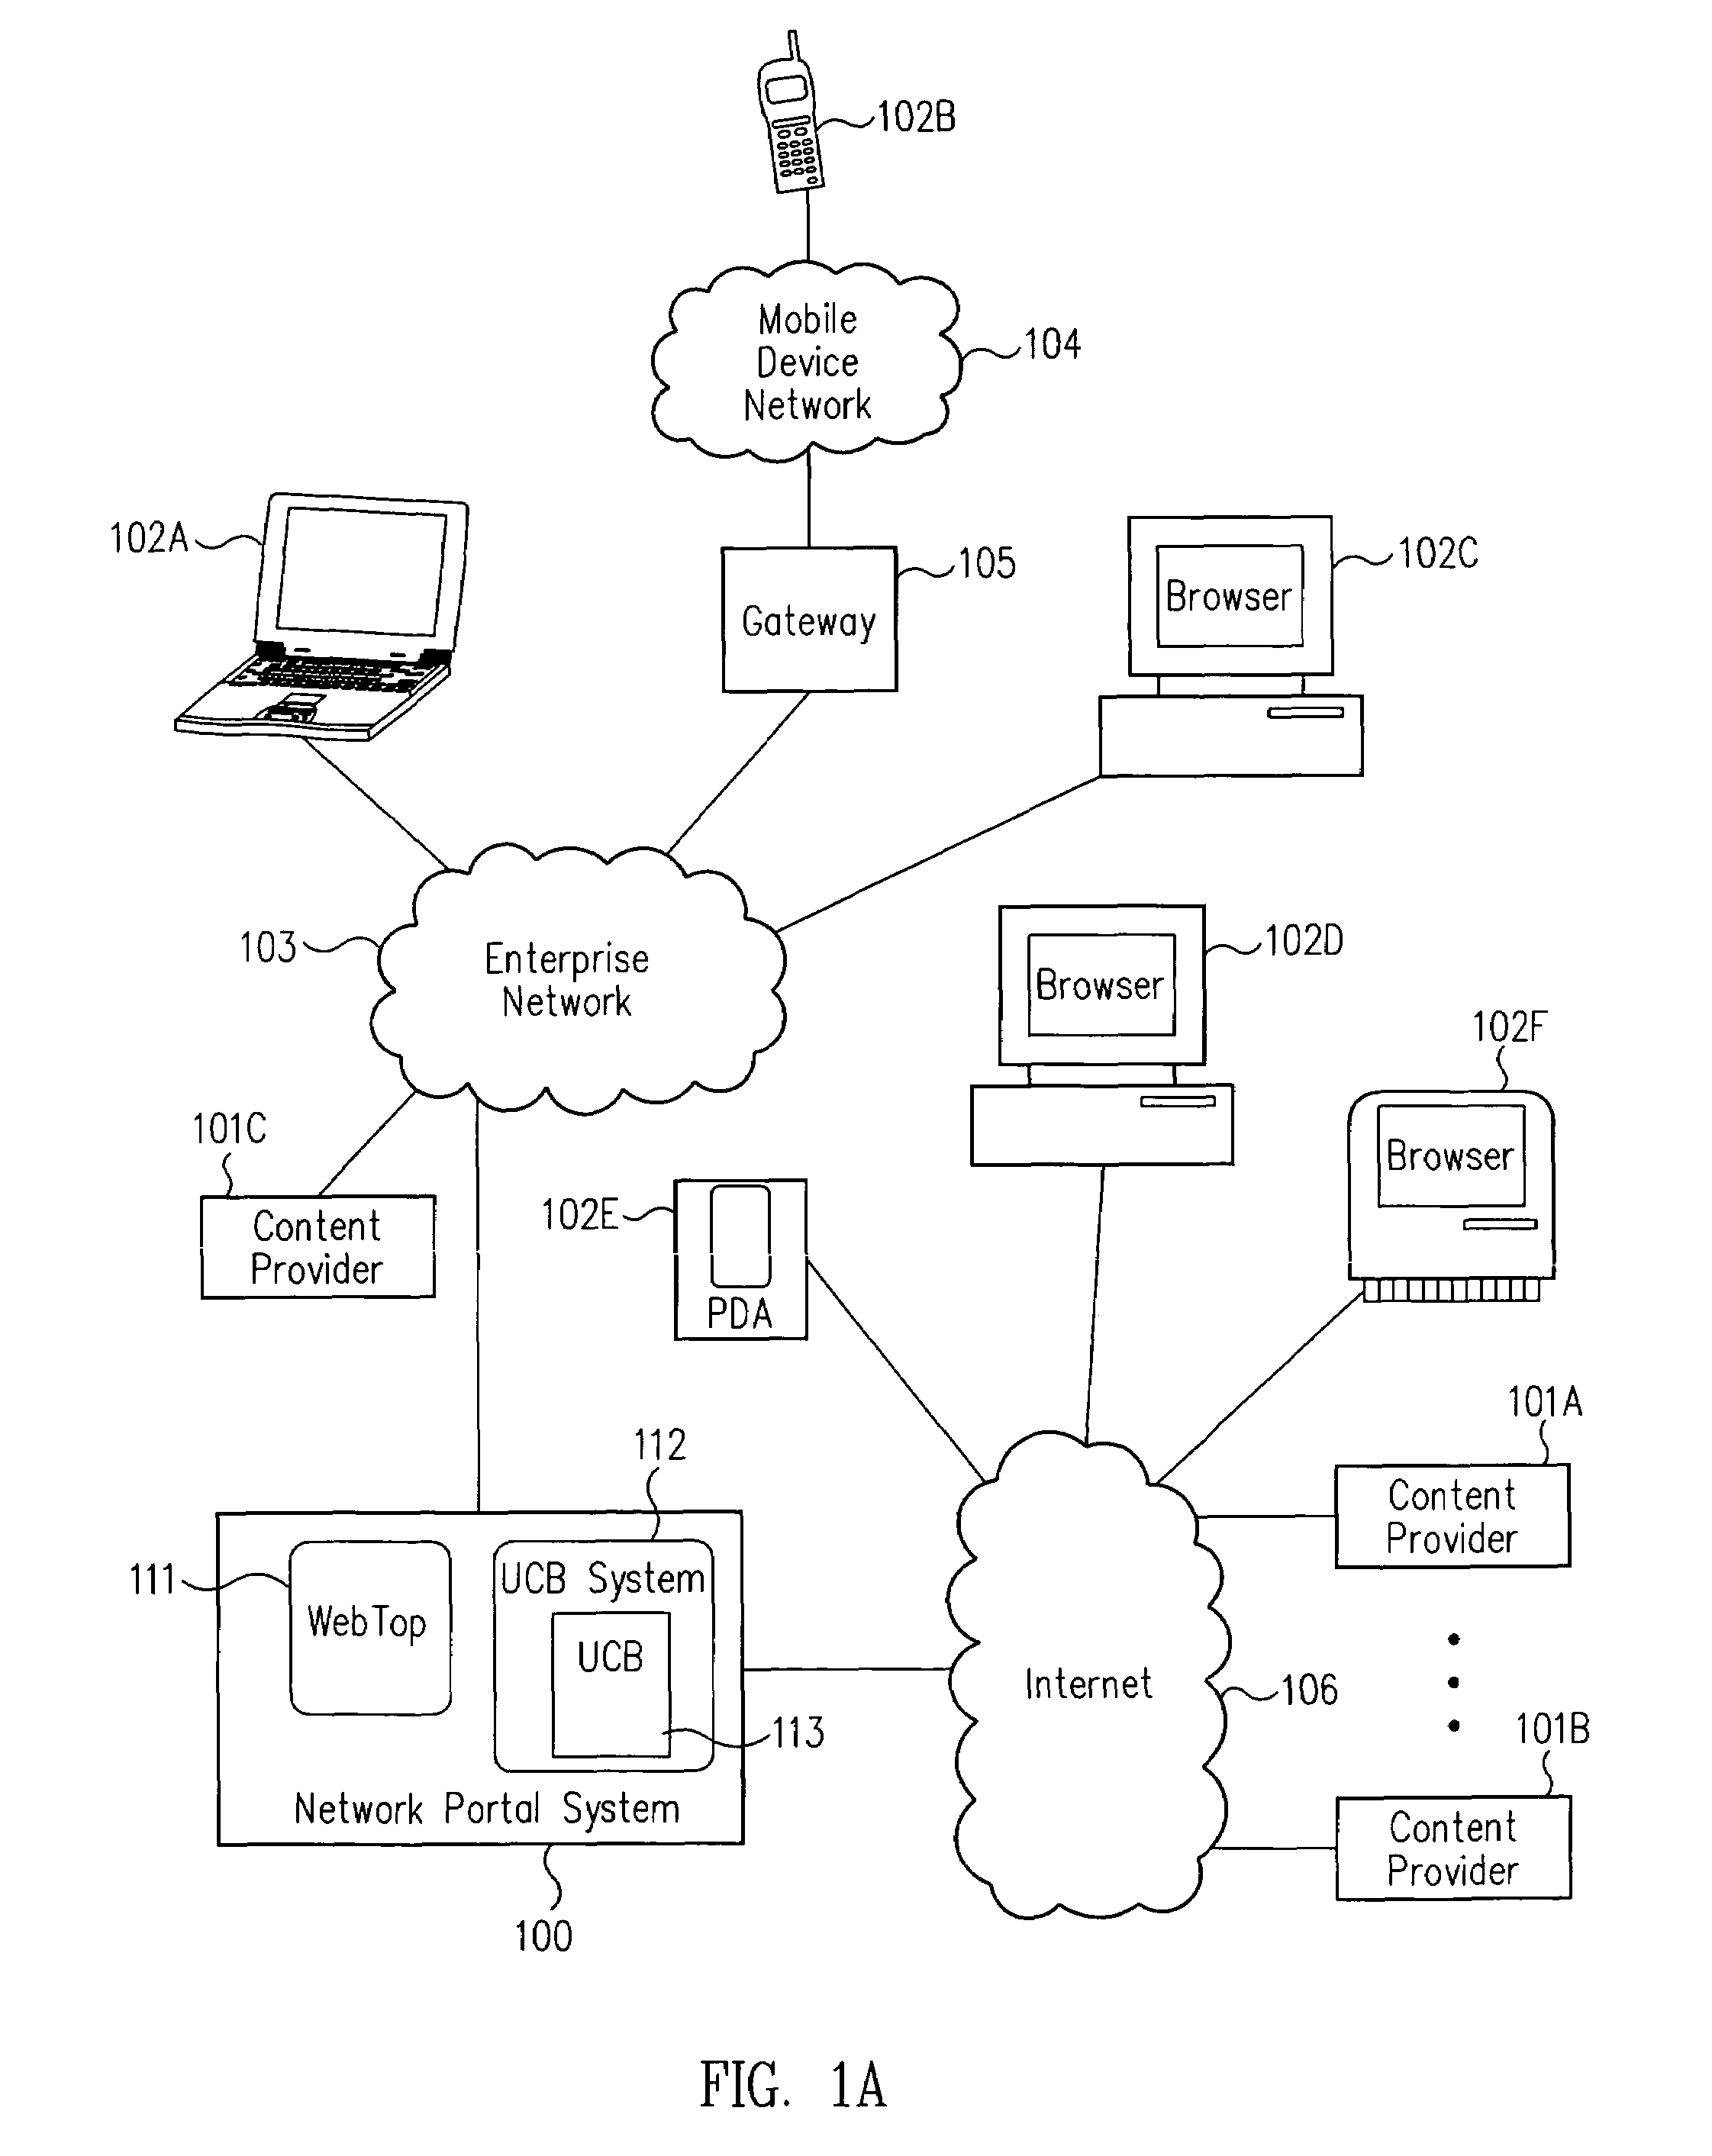 Network portal system and methods